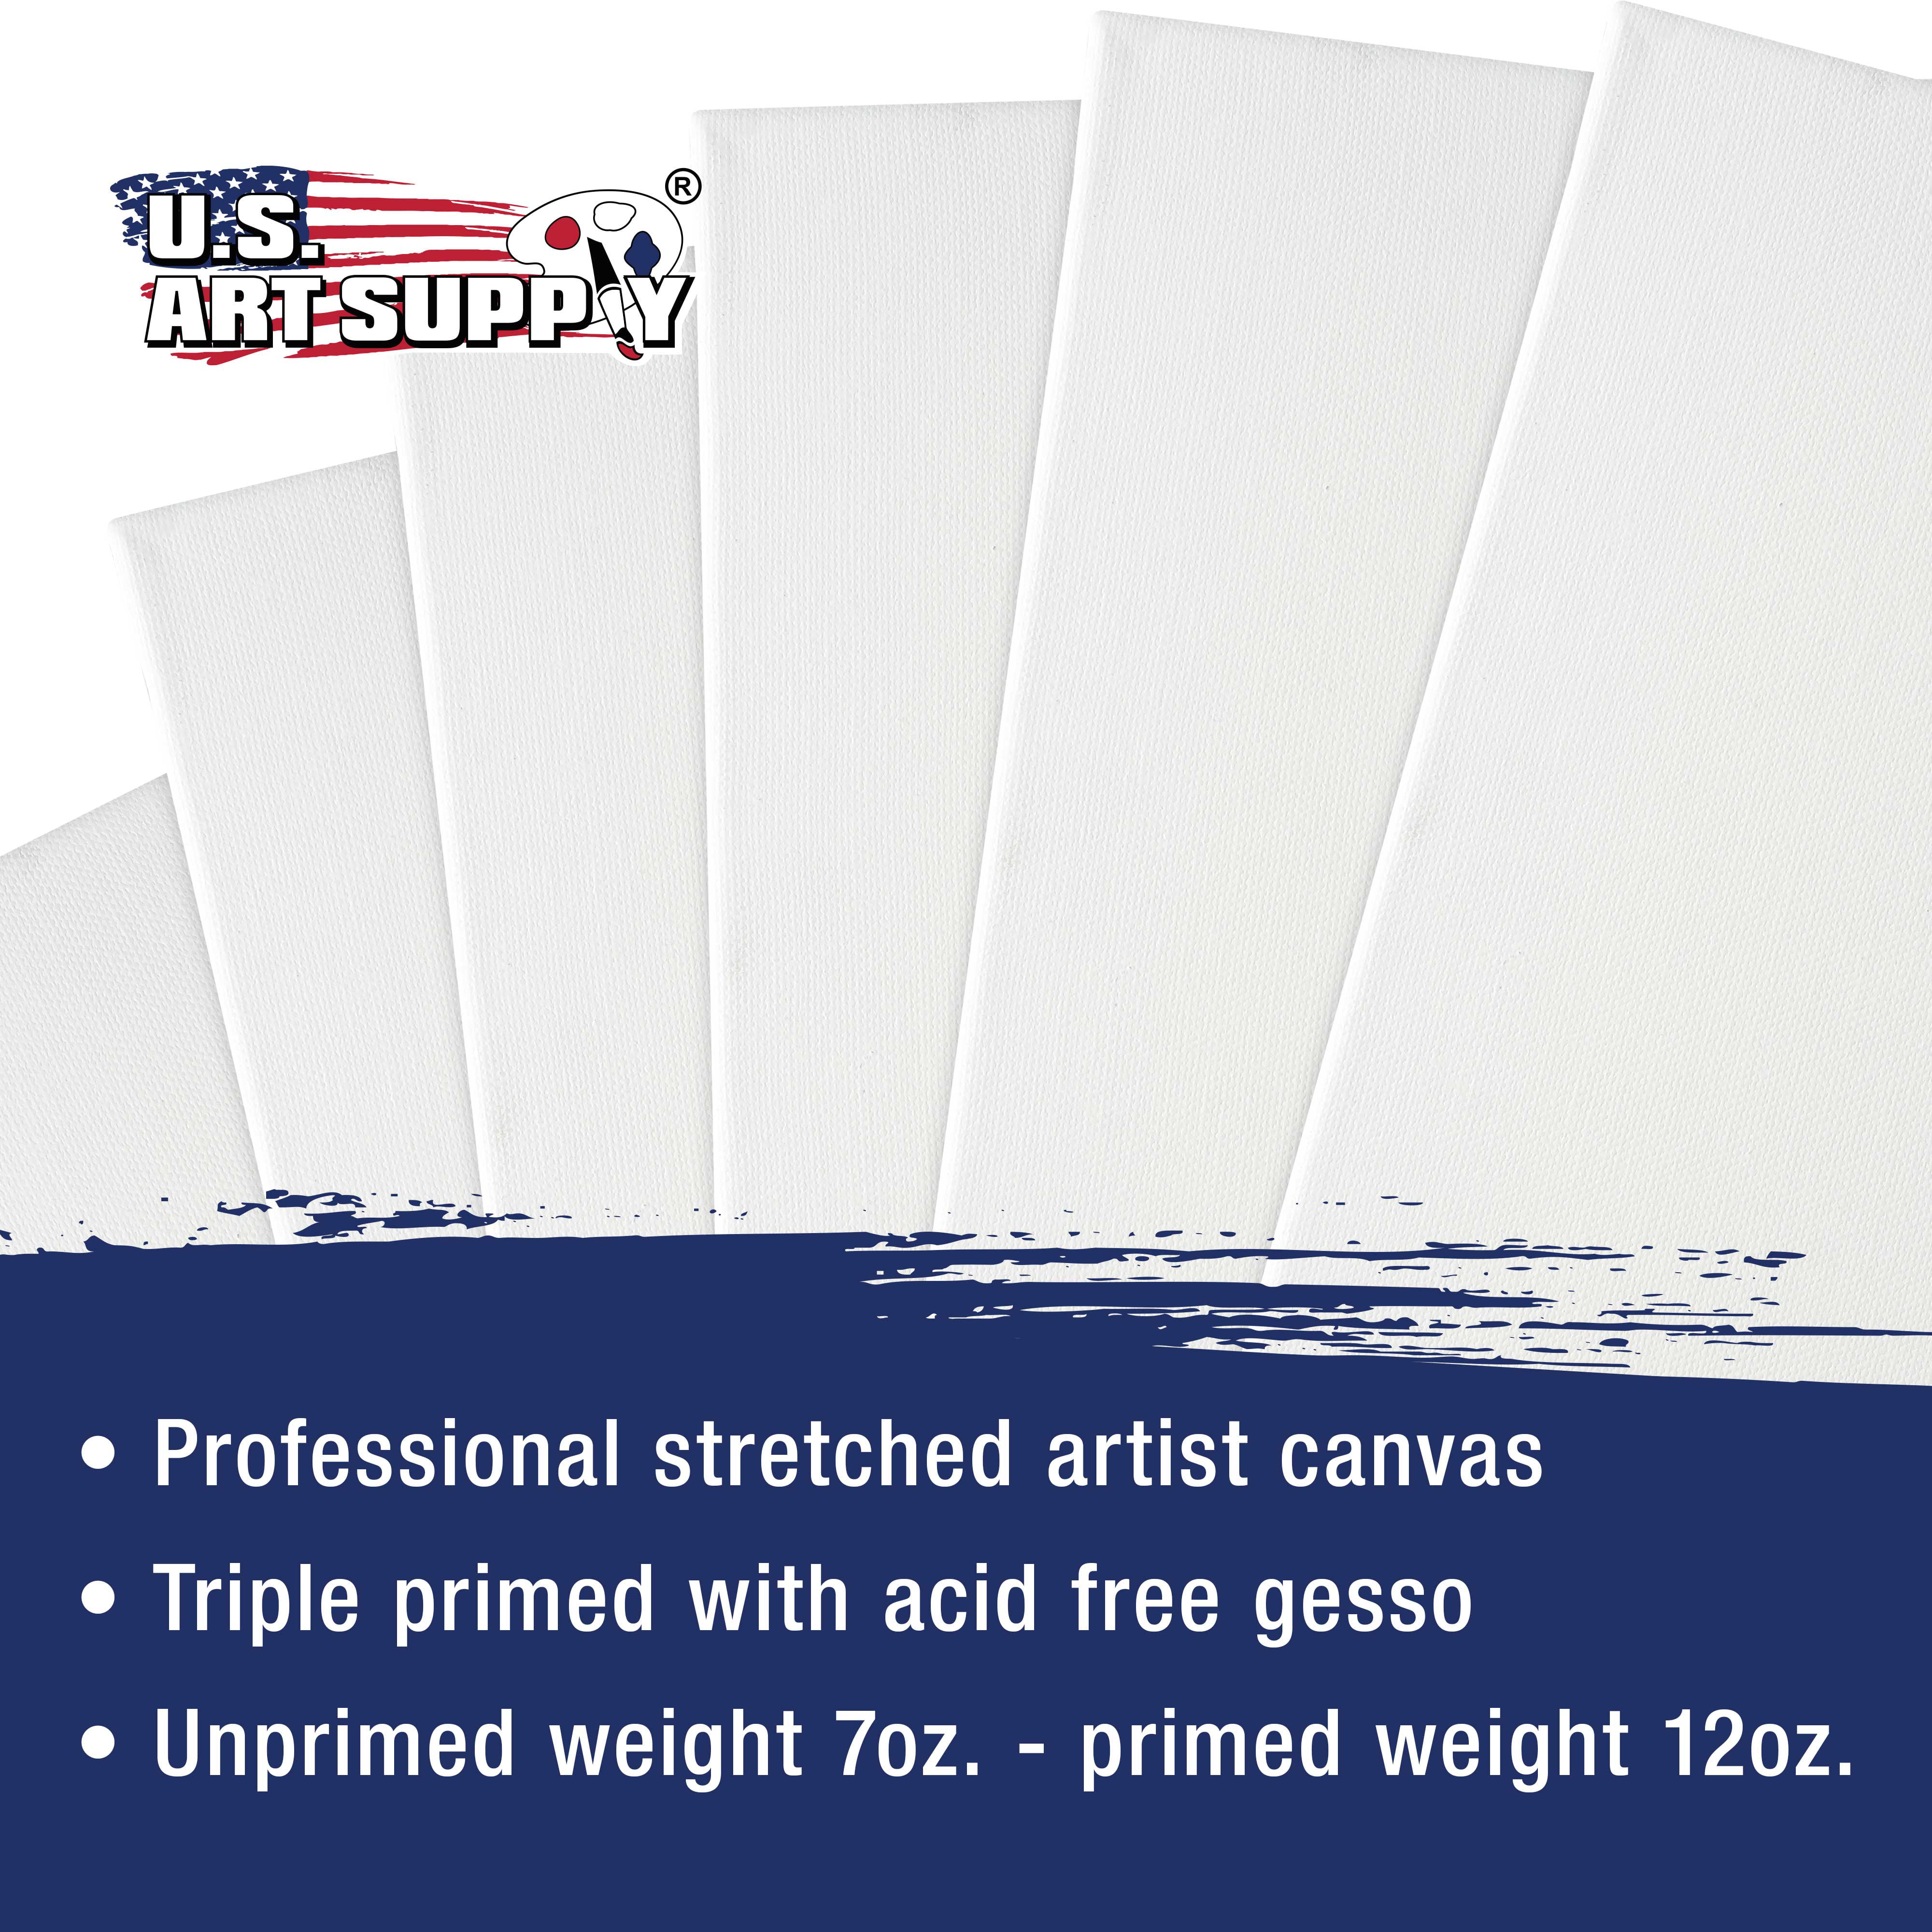 US Art Supply Professional Quality Stretched Canvas 12-ounce Primed Variety Pack Square Assortment 20x20, 16x16, 12x12, 8x8, 4x4 